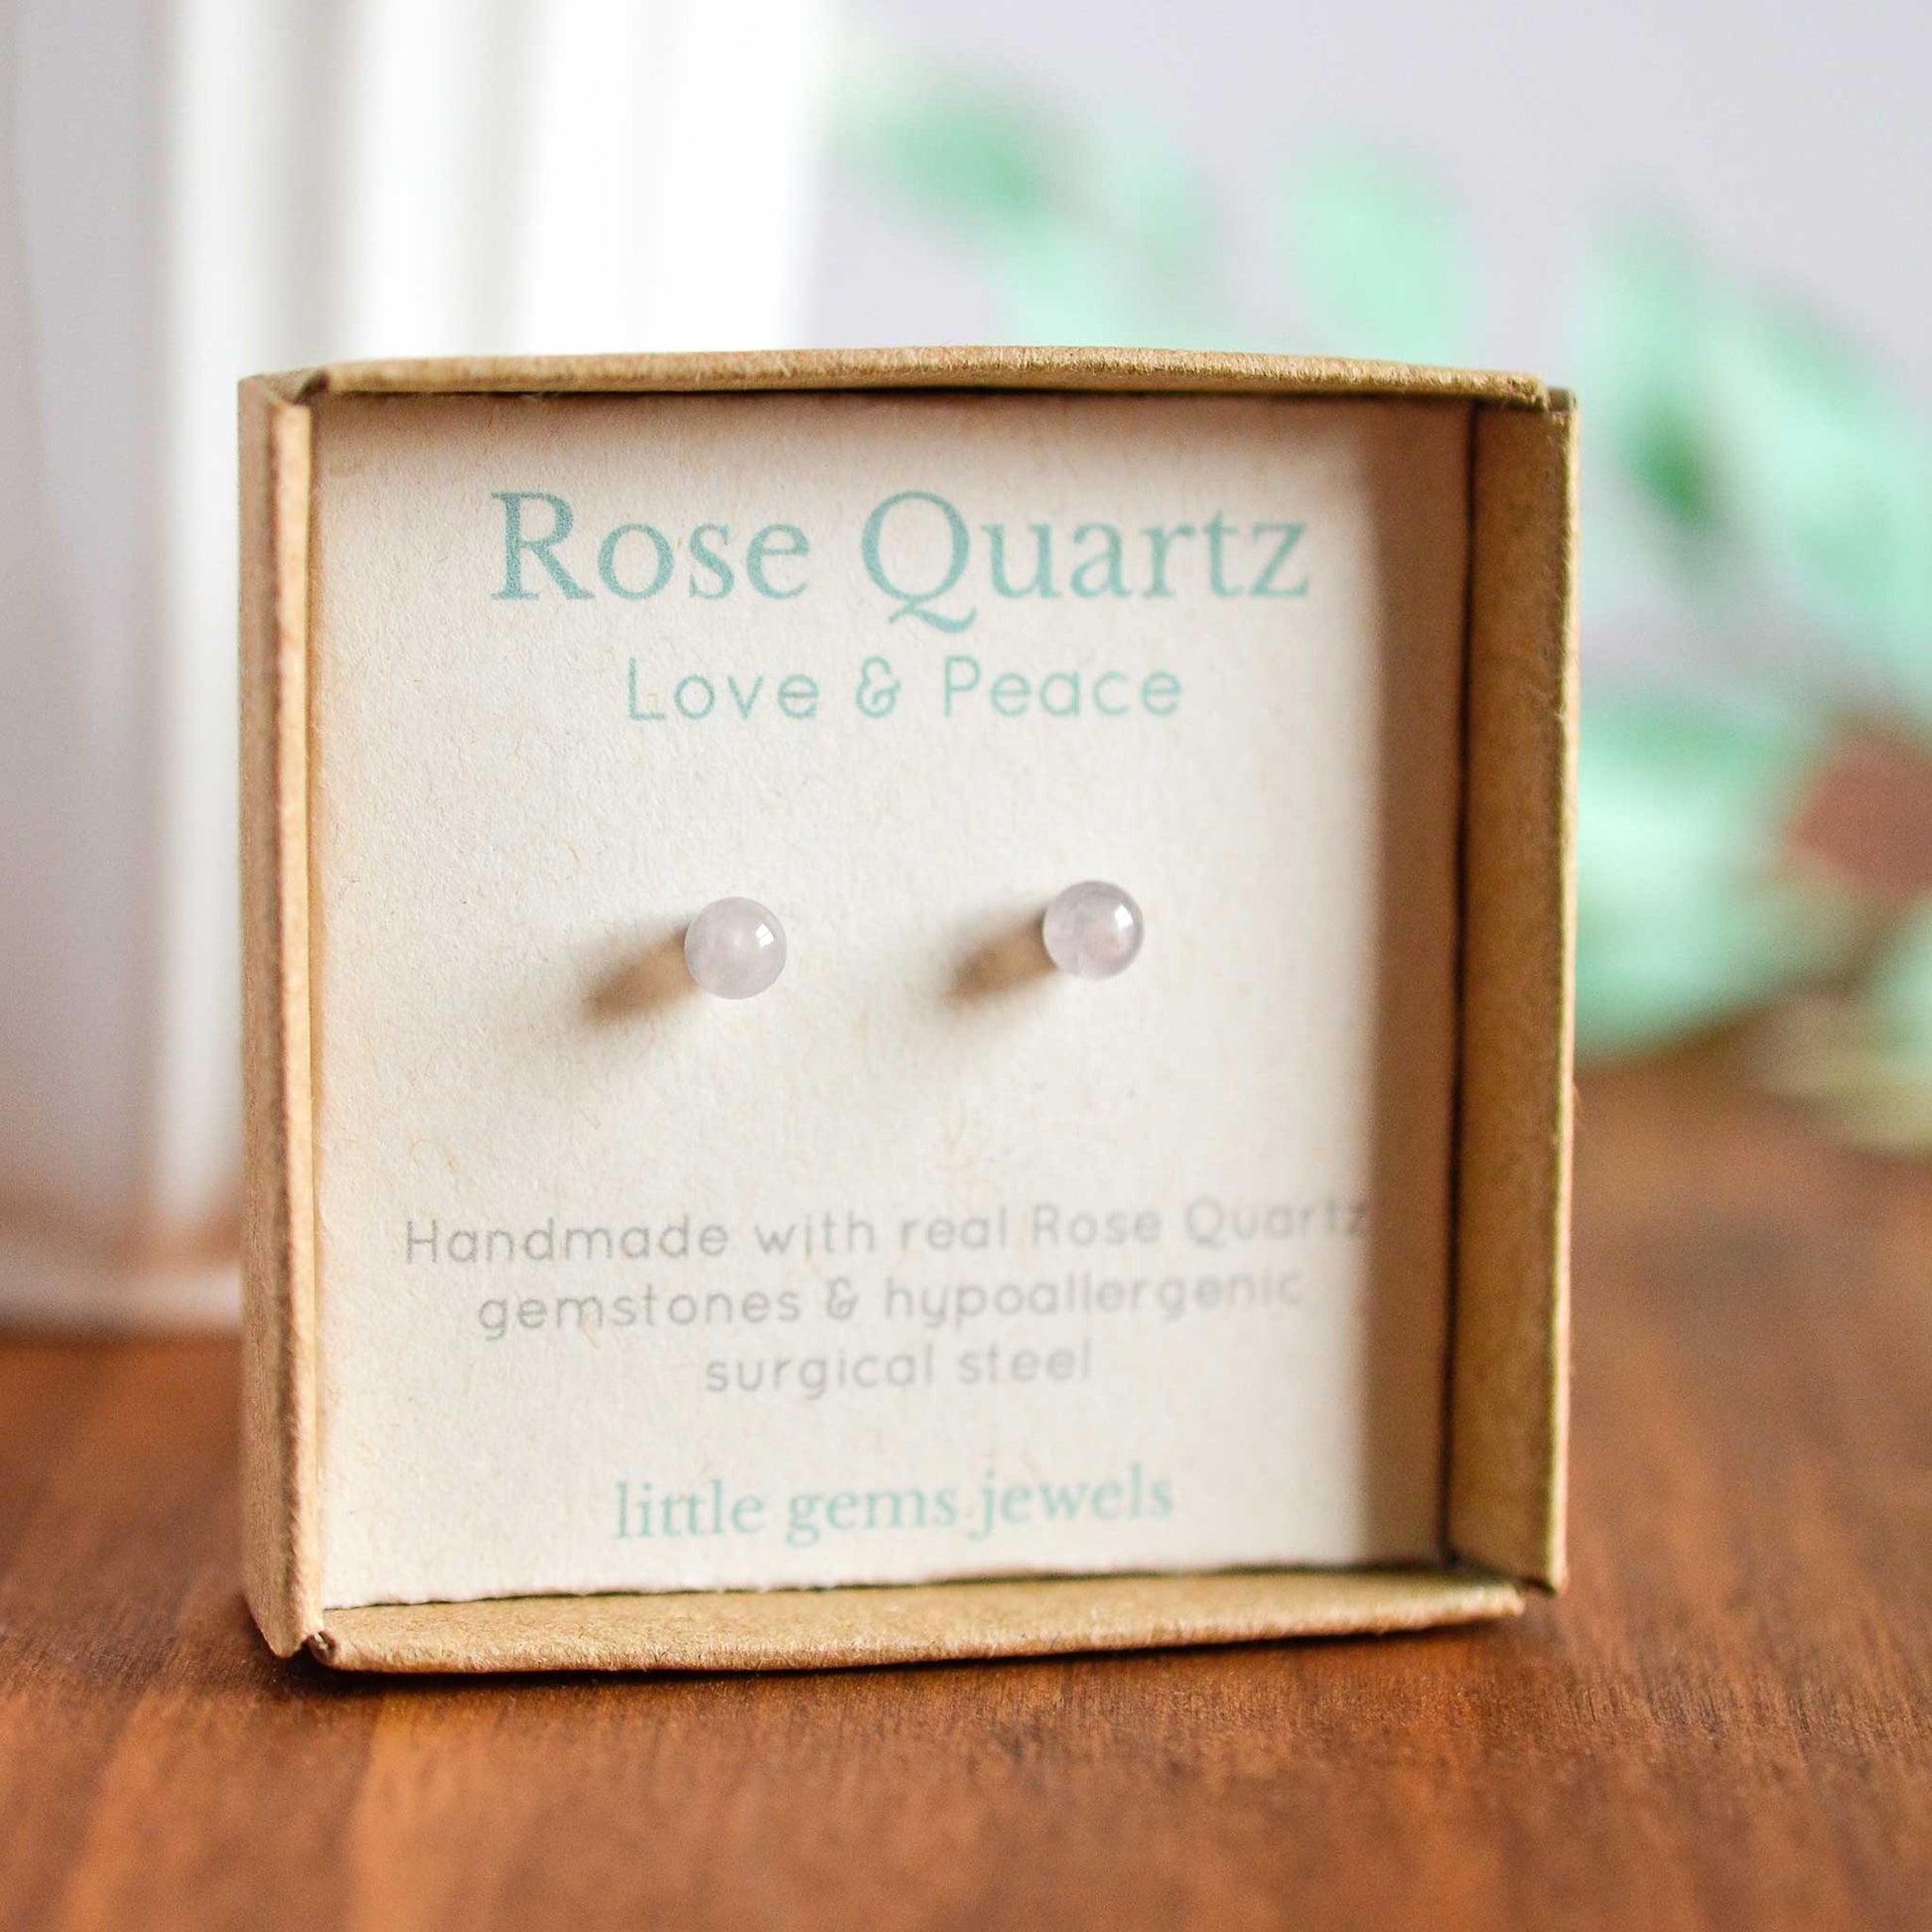 Rose Quartz for love and peace gemstone stud earrings in eco friendly gift box